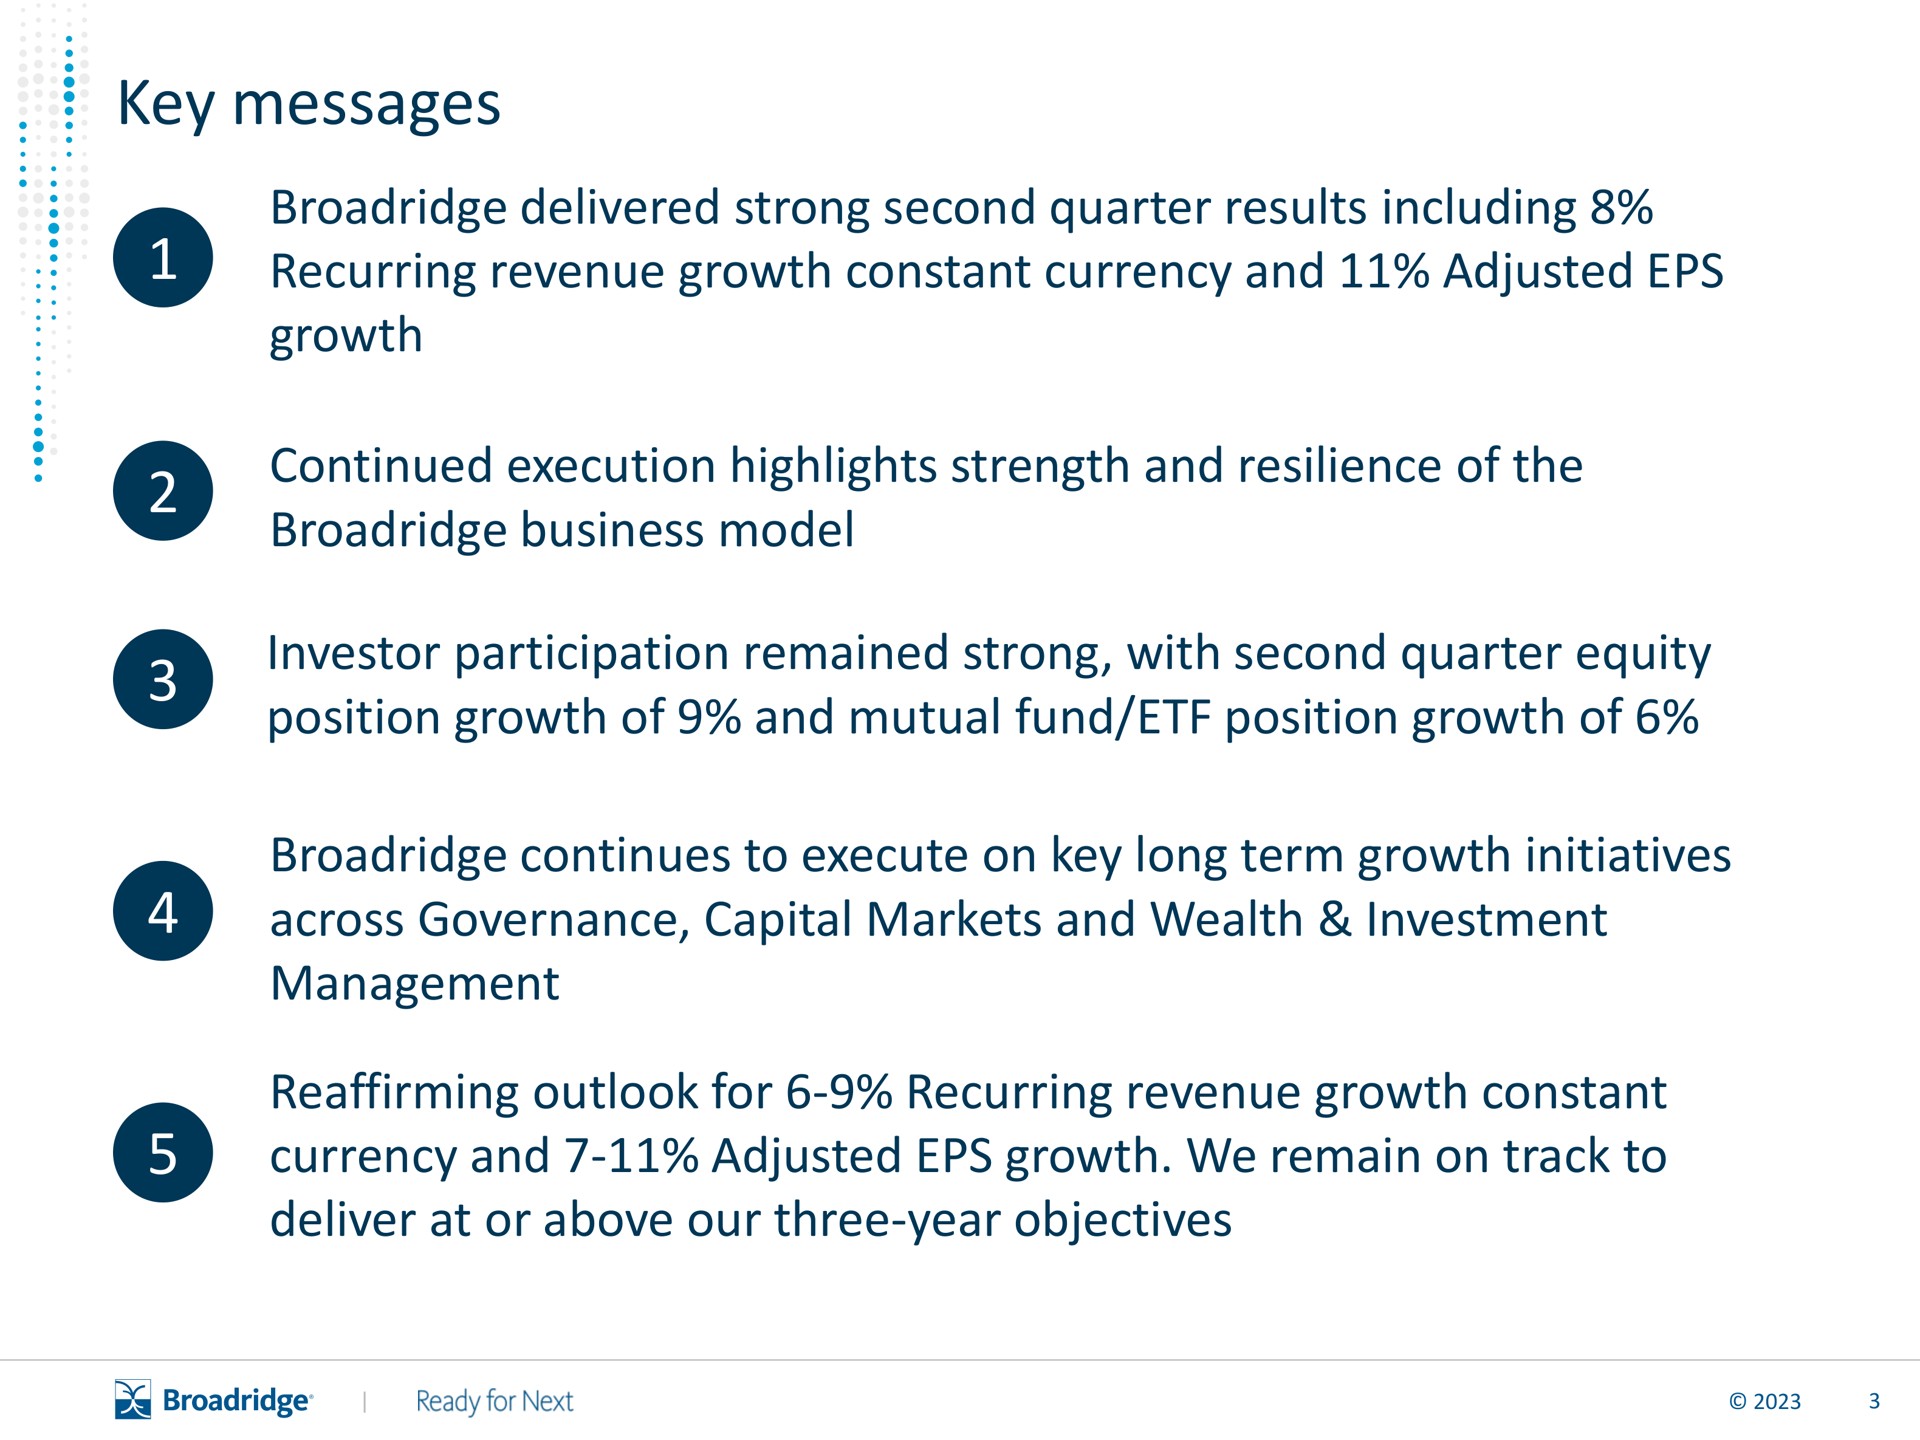 key messages delivered strong second quarter results including recurring revenue growth constant currency and adjusted growth continued execution highlights strength and resilience of the business model investor participation remained strong with second quarter equity position growth of and mutual fund position growth of continues to execute on key long term growth initiatives across governance capital markets and wealth investment management reaffirming outlook for recurring revenue growth constant currency and adjusted growth we remain on track to deliver at or above our three year objectives | Broadridge Financial Solutions